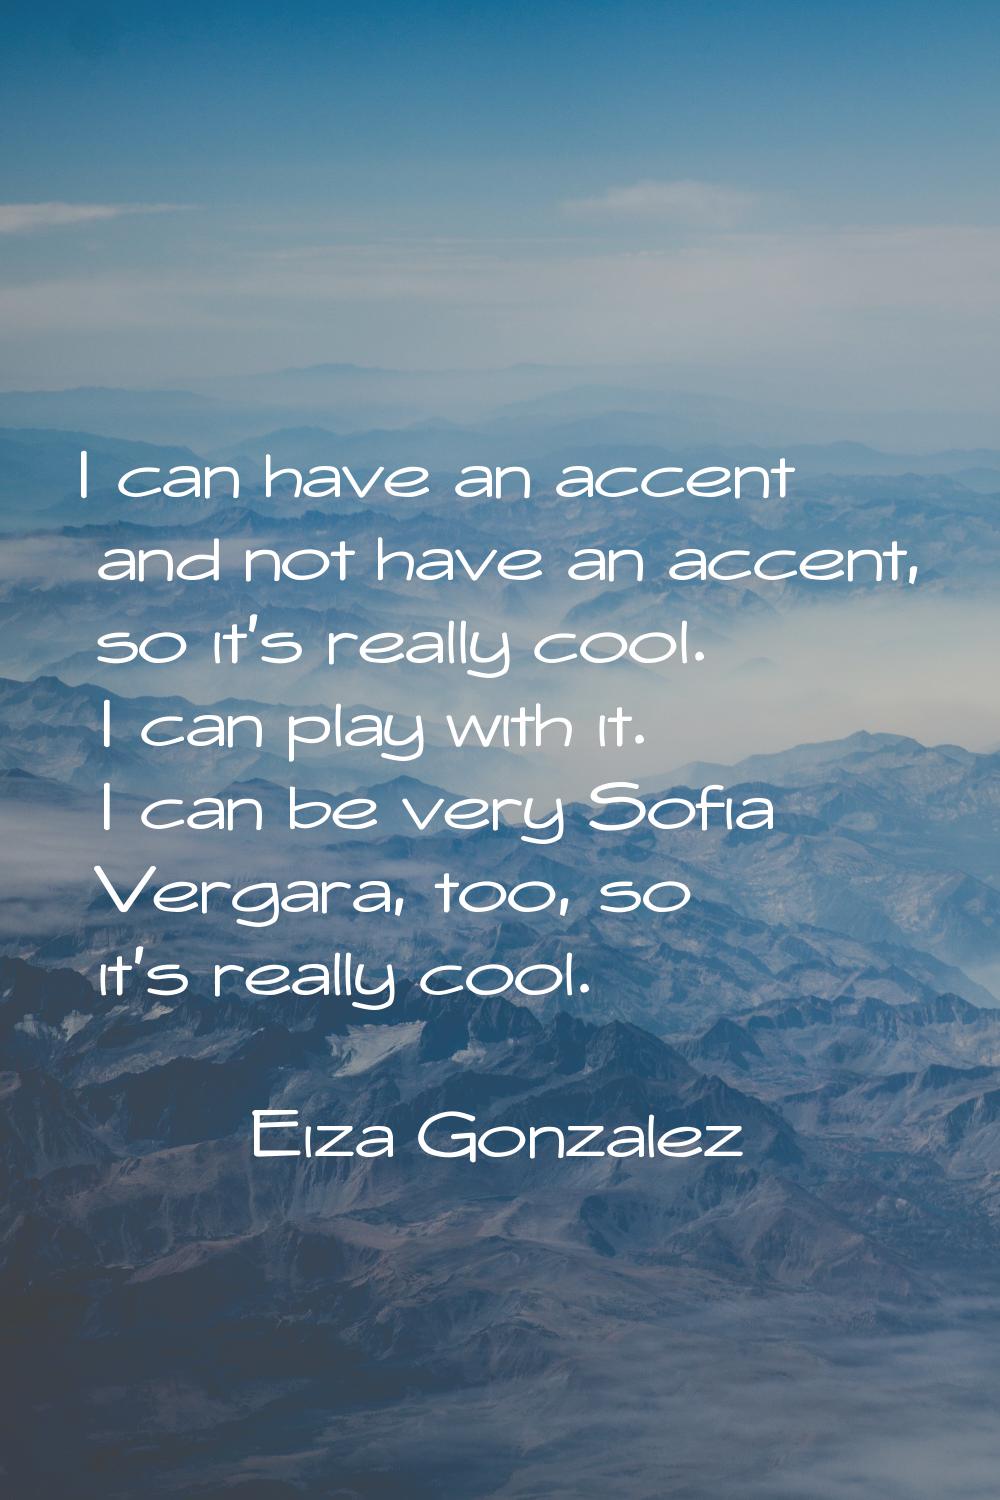 I can have an accent and not have an accent, so it's really cool. I can play with it. I can be very